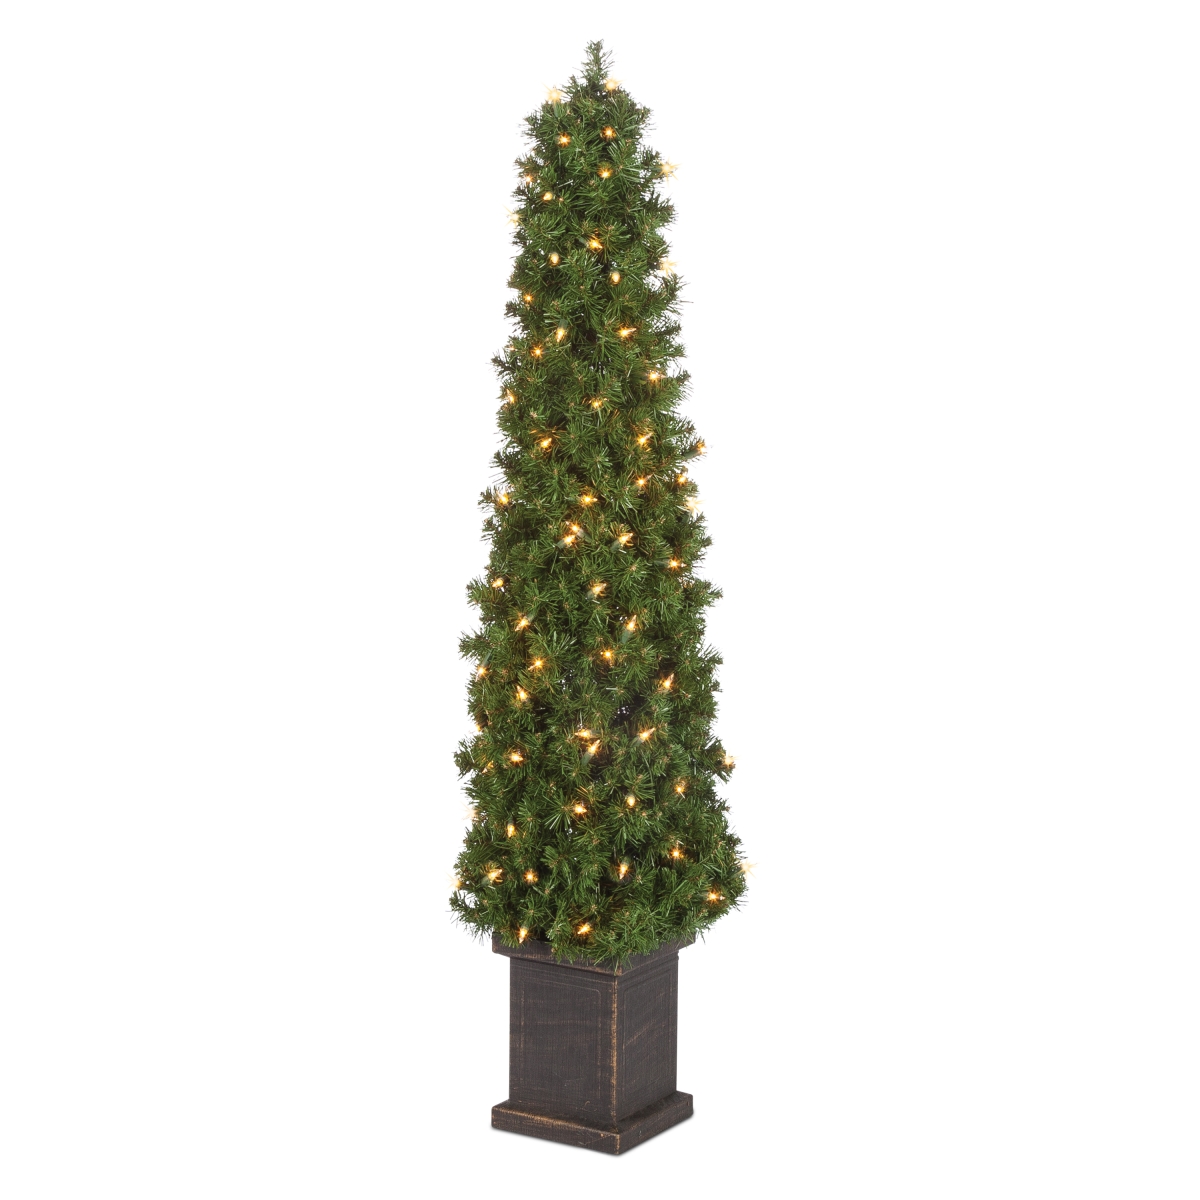 5220--40ce 4 Ft. Pre-lit Potted Tower Tree With Round Tips & 100 Clear Lights